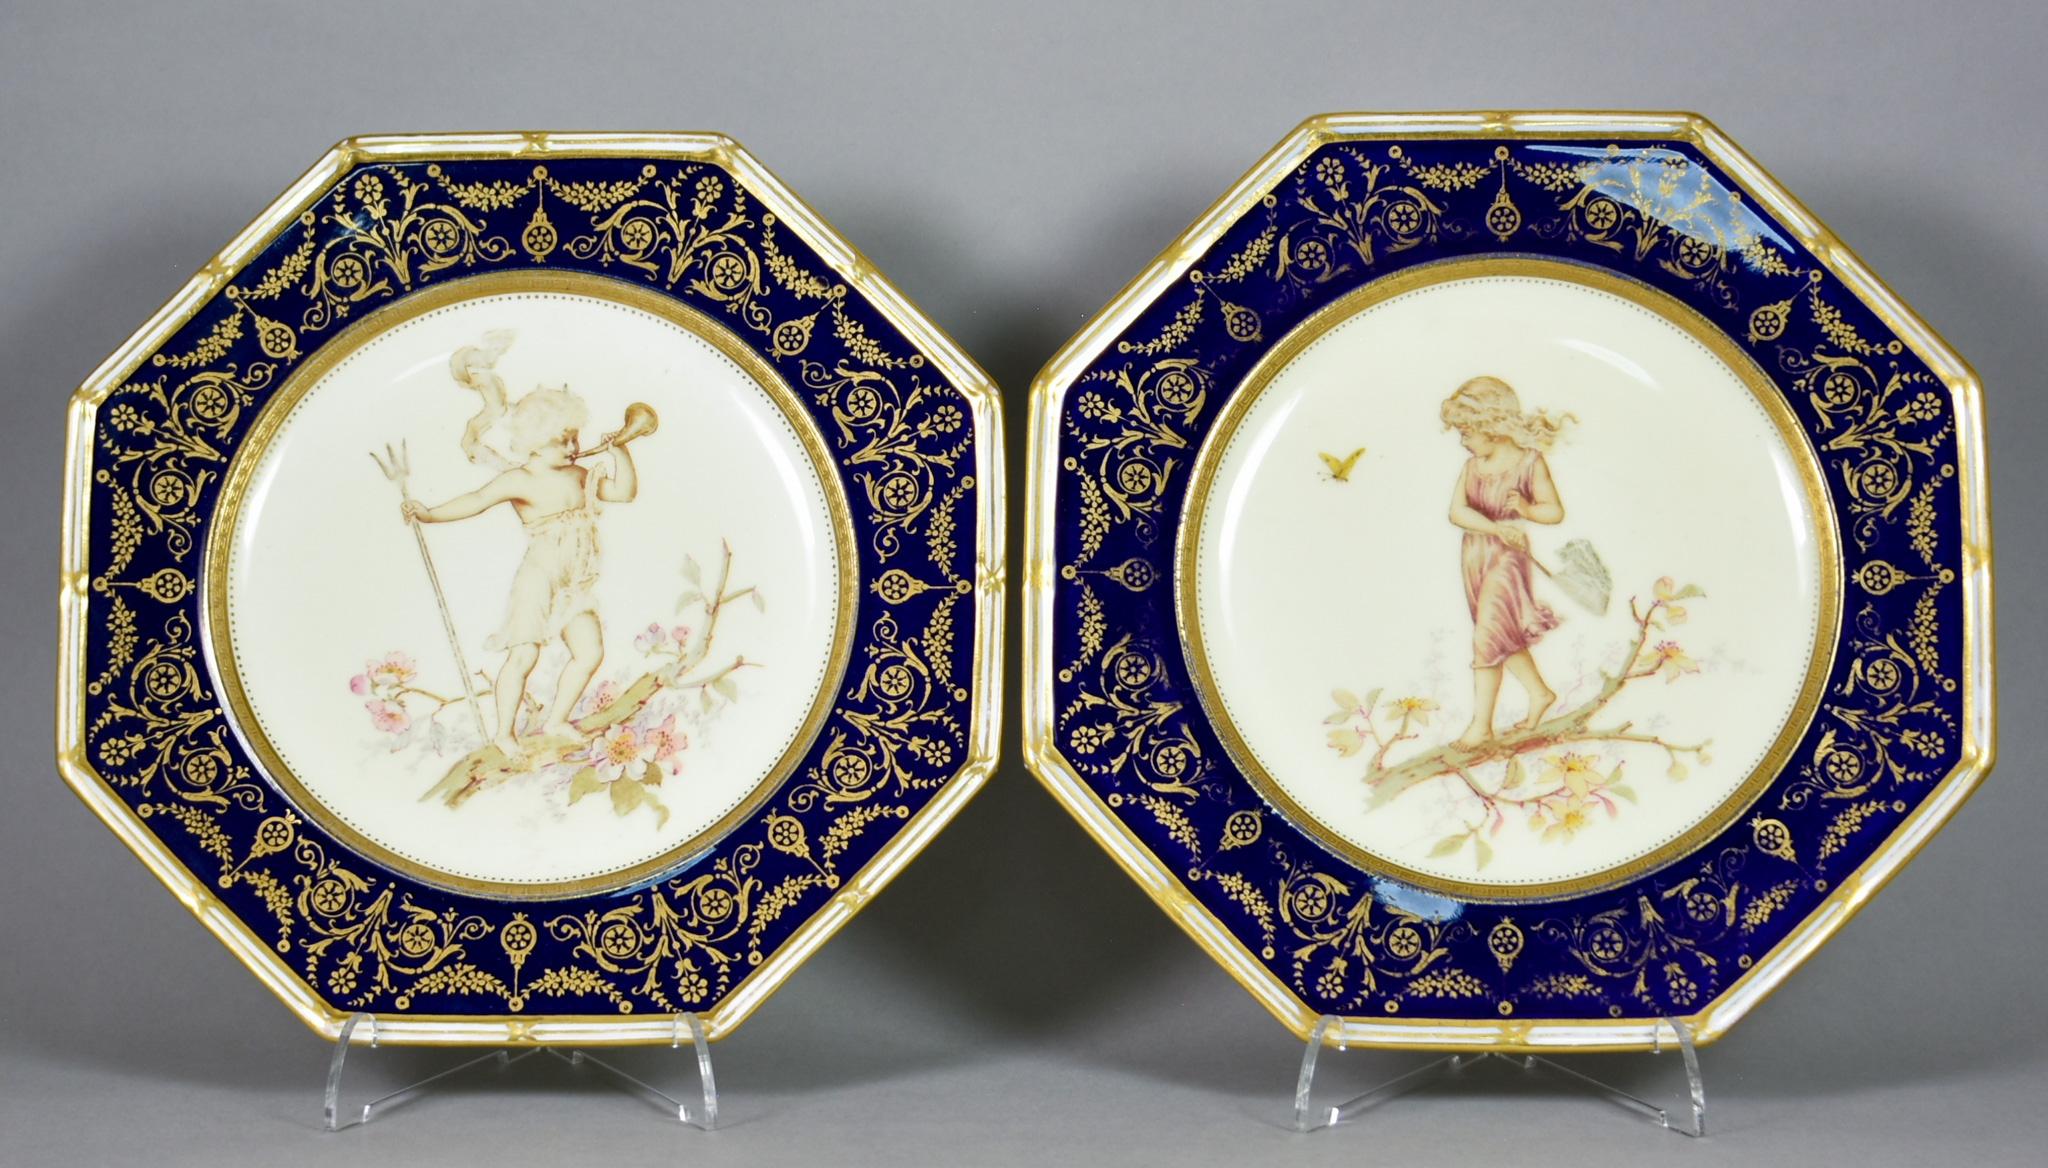 A Pair of Wedgwood Porcelain Octagonal Plates, with white, blue and gilt borders, the centres